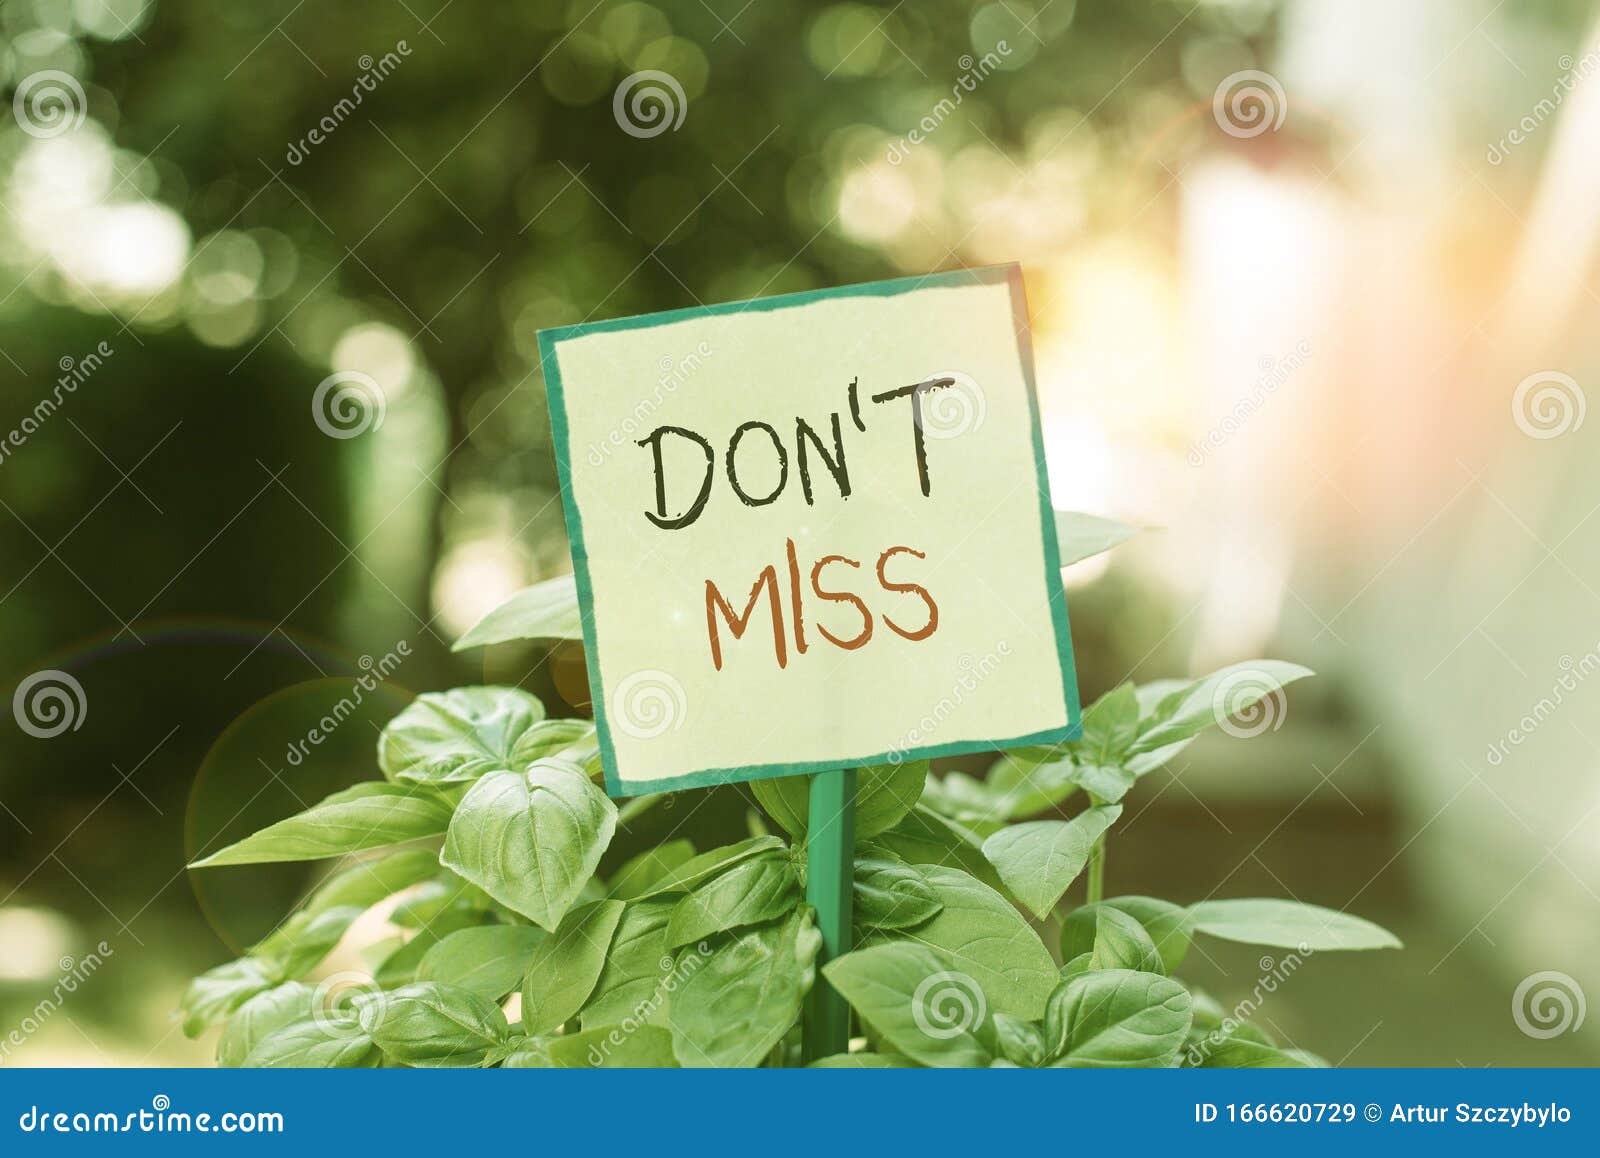 Conceptual Hand Writing Showing Don T Miss Business Photo Text Comanalysisding Them Not To Miss Out An Opportunity Or Stock Image Image Of Challenge Countdown